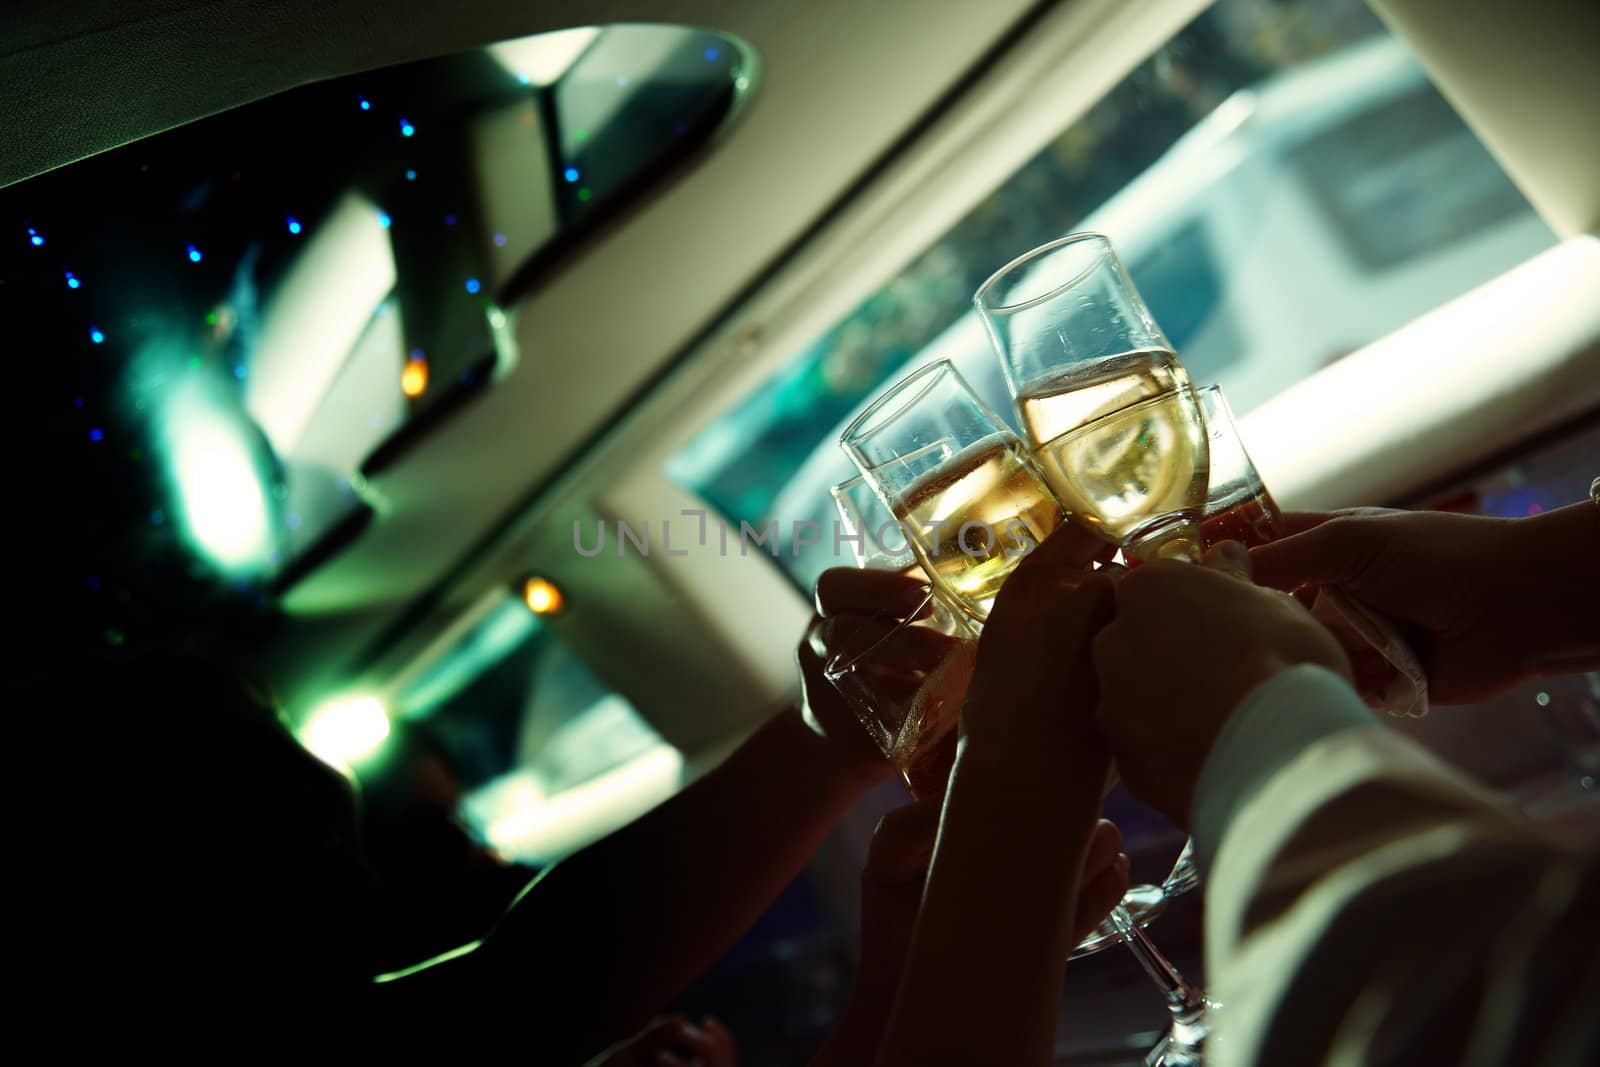 Casual photo of the human hand holding wine glasses in limousine 